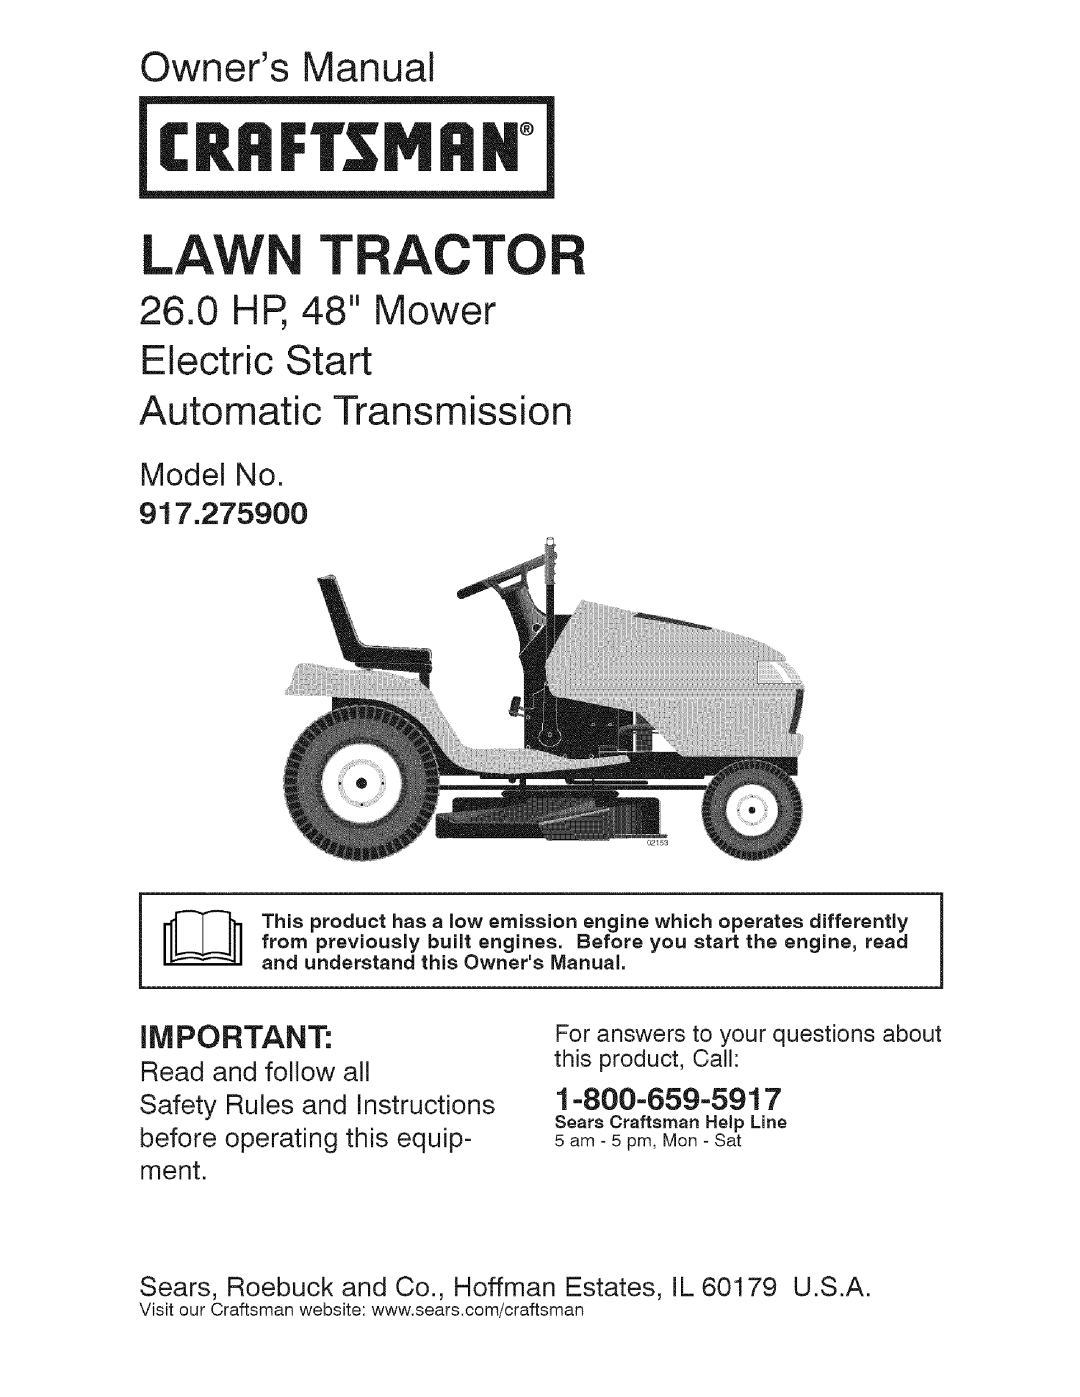 Craftsman manual Law Tractor, Owners Manual, Model No 917.275900, Crrftsmrh, 1=800=659-5917 